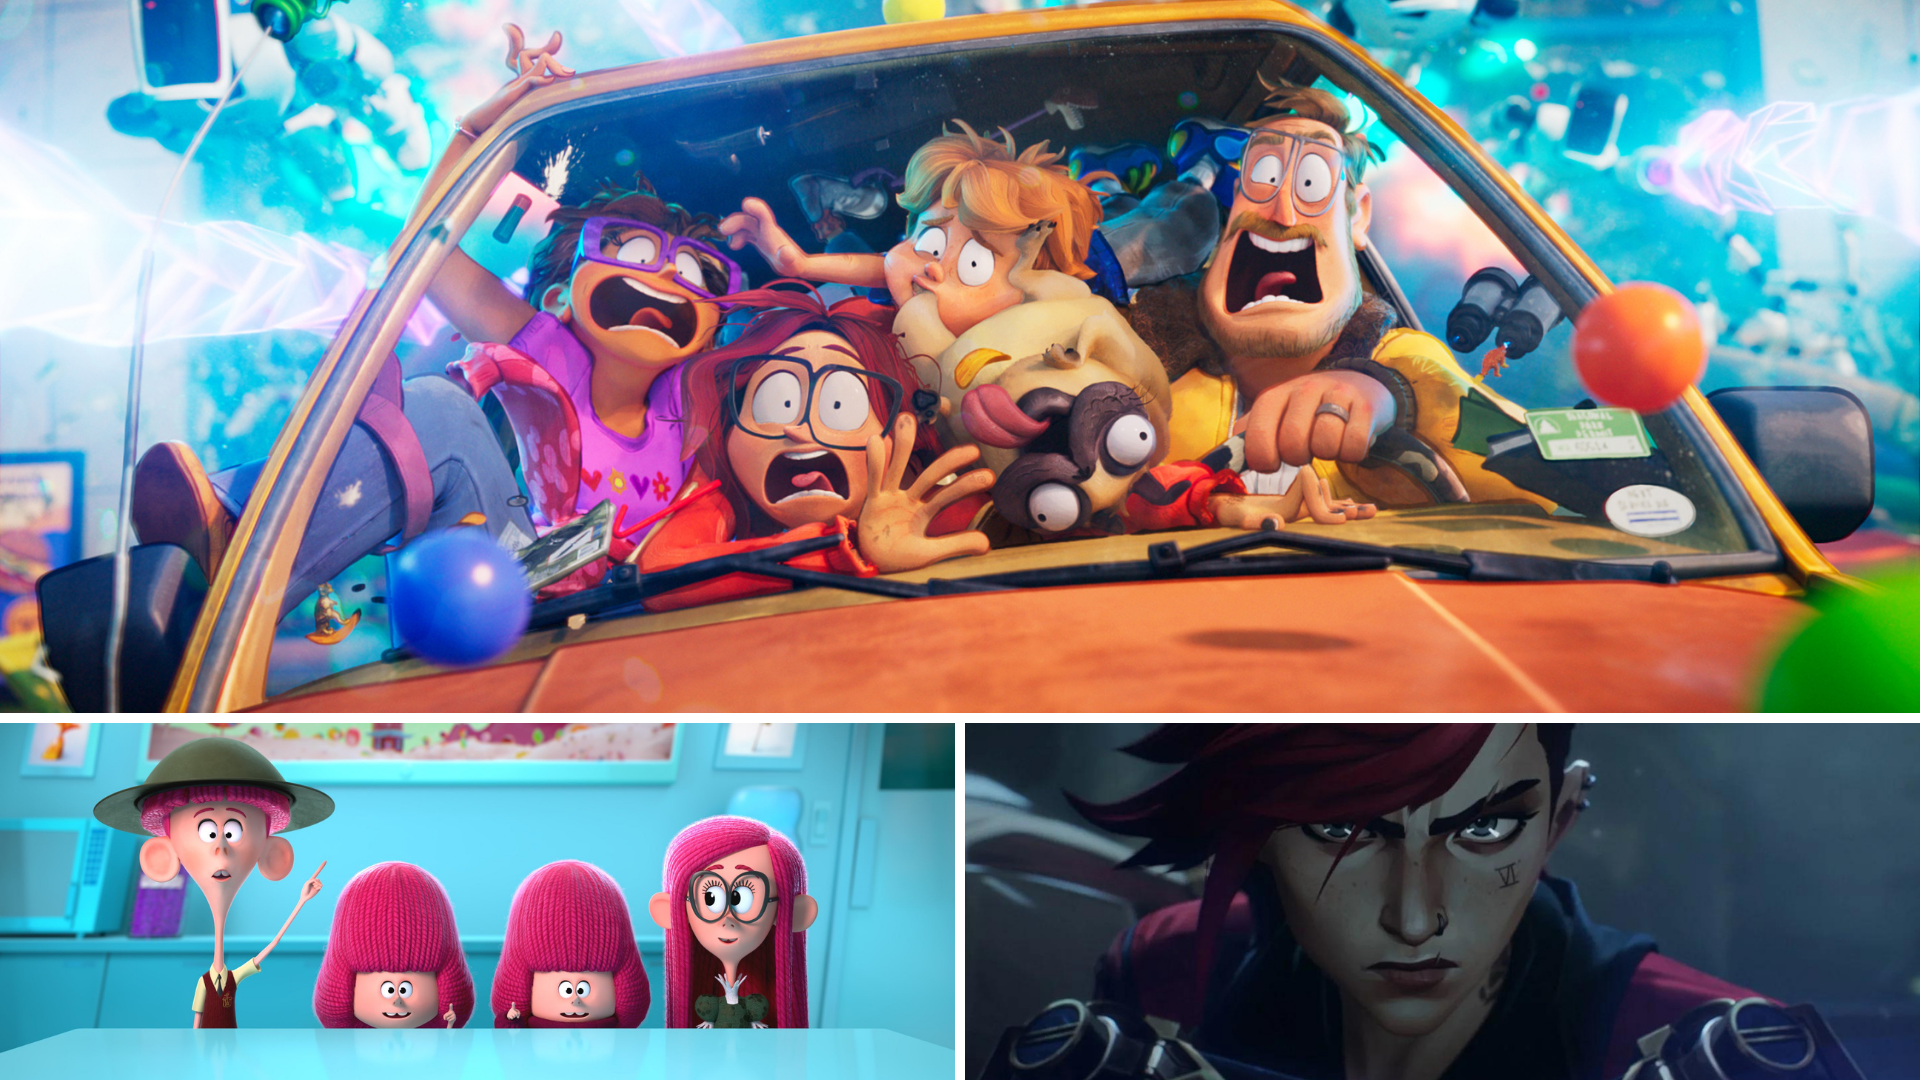 Style Over Realism: The Latest 3D Animation Trend